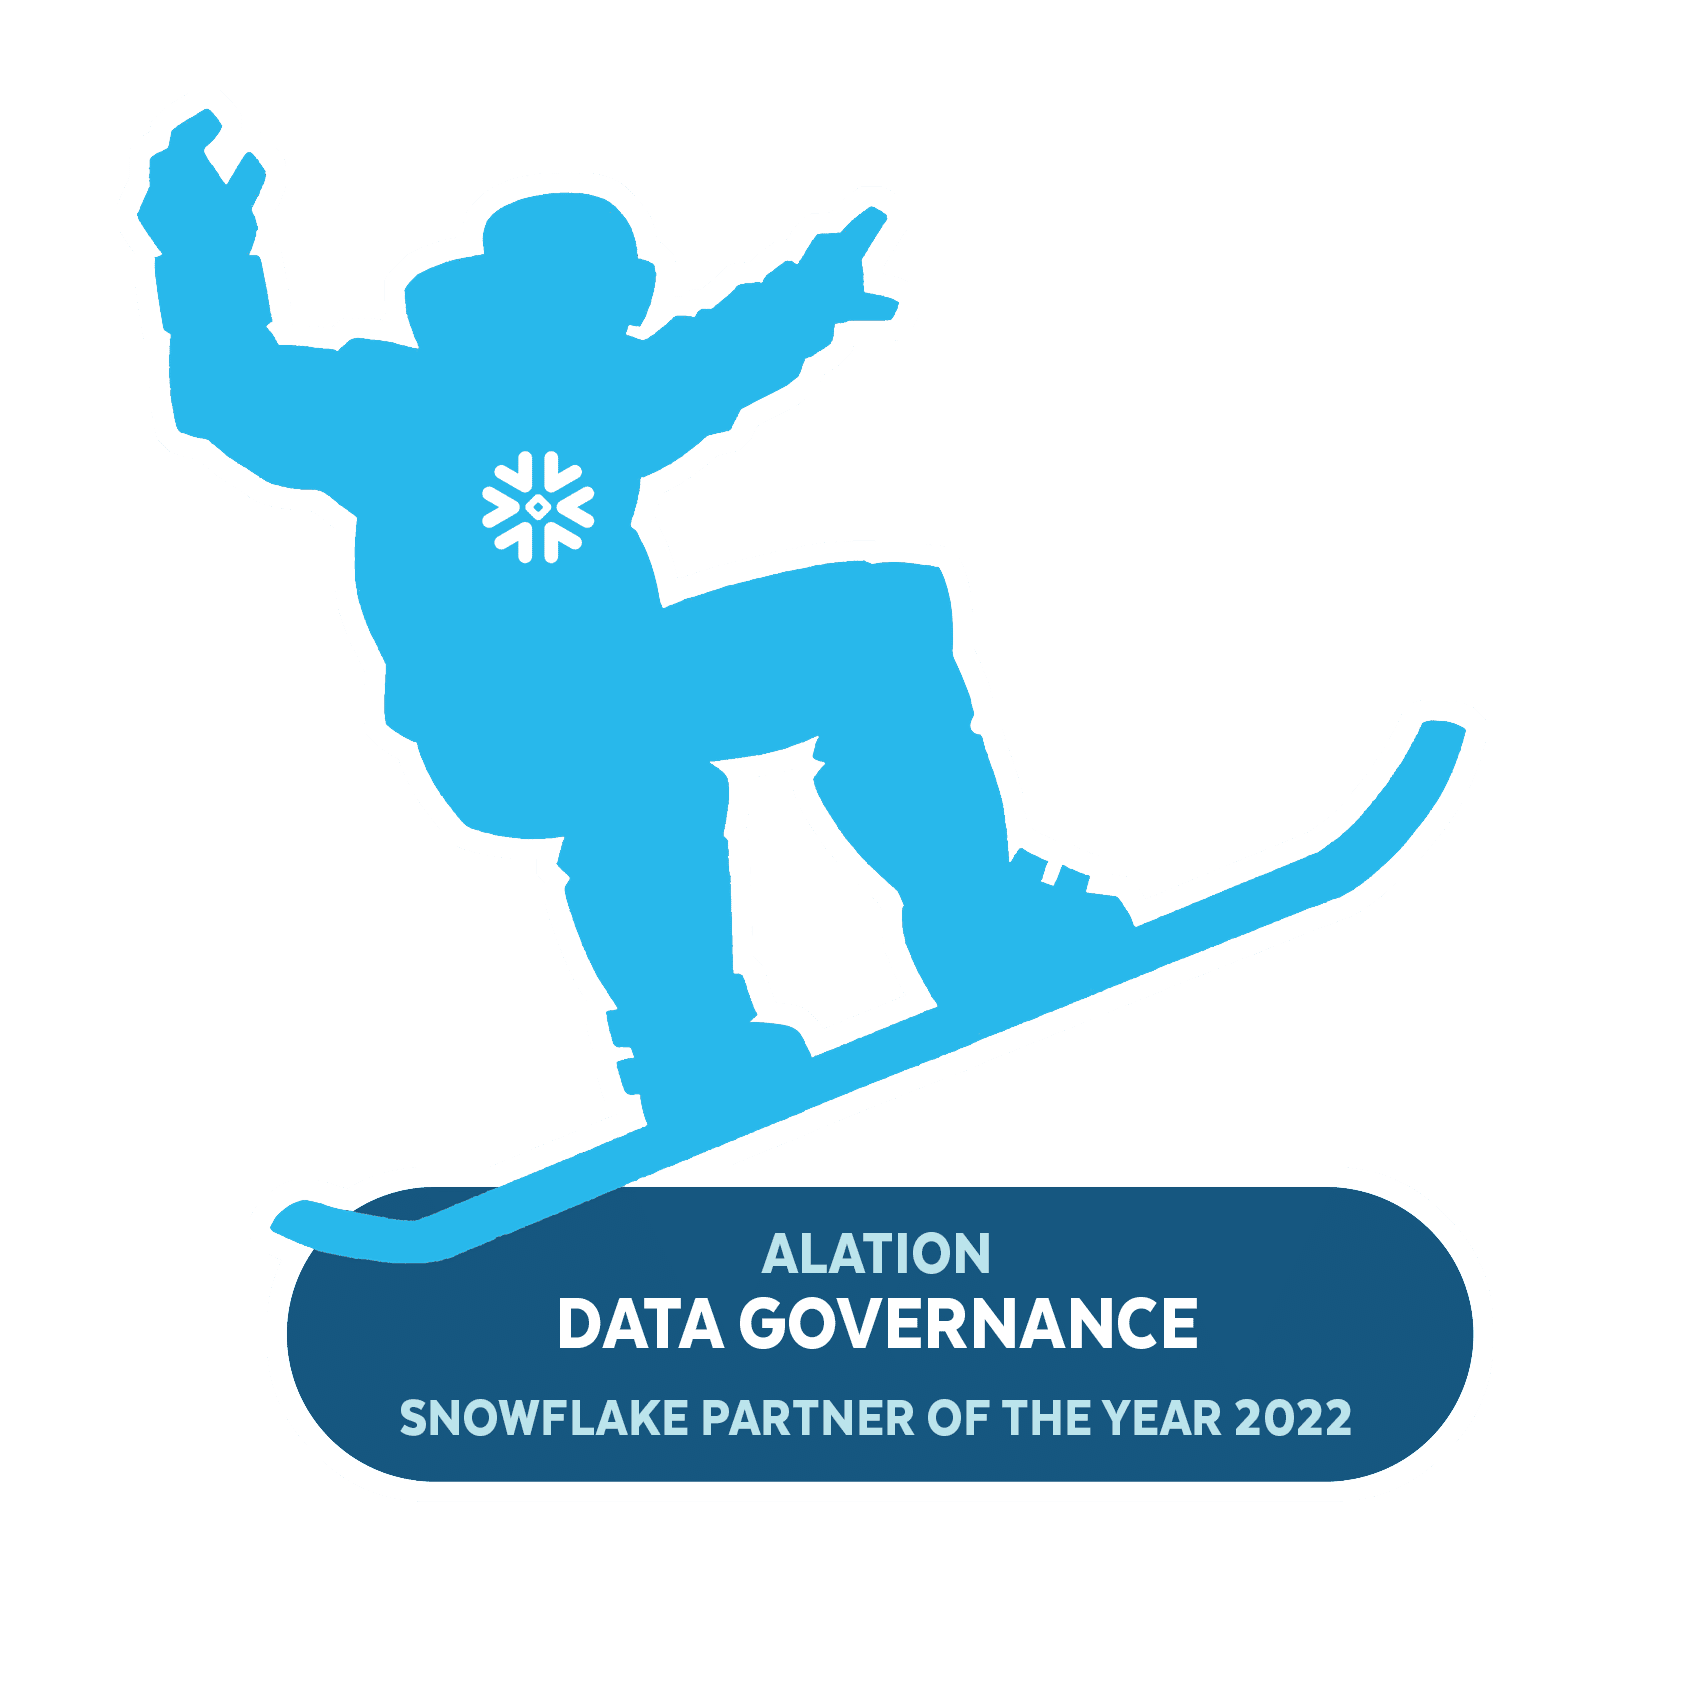 Alation is Snowflakes Data Governance Partner of the Year 2022